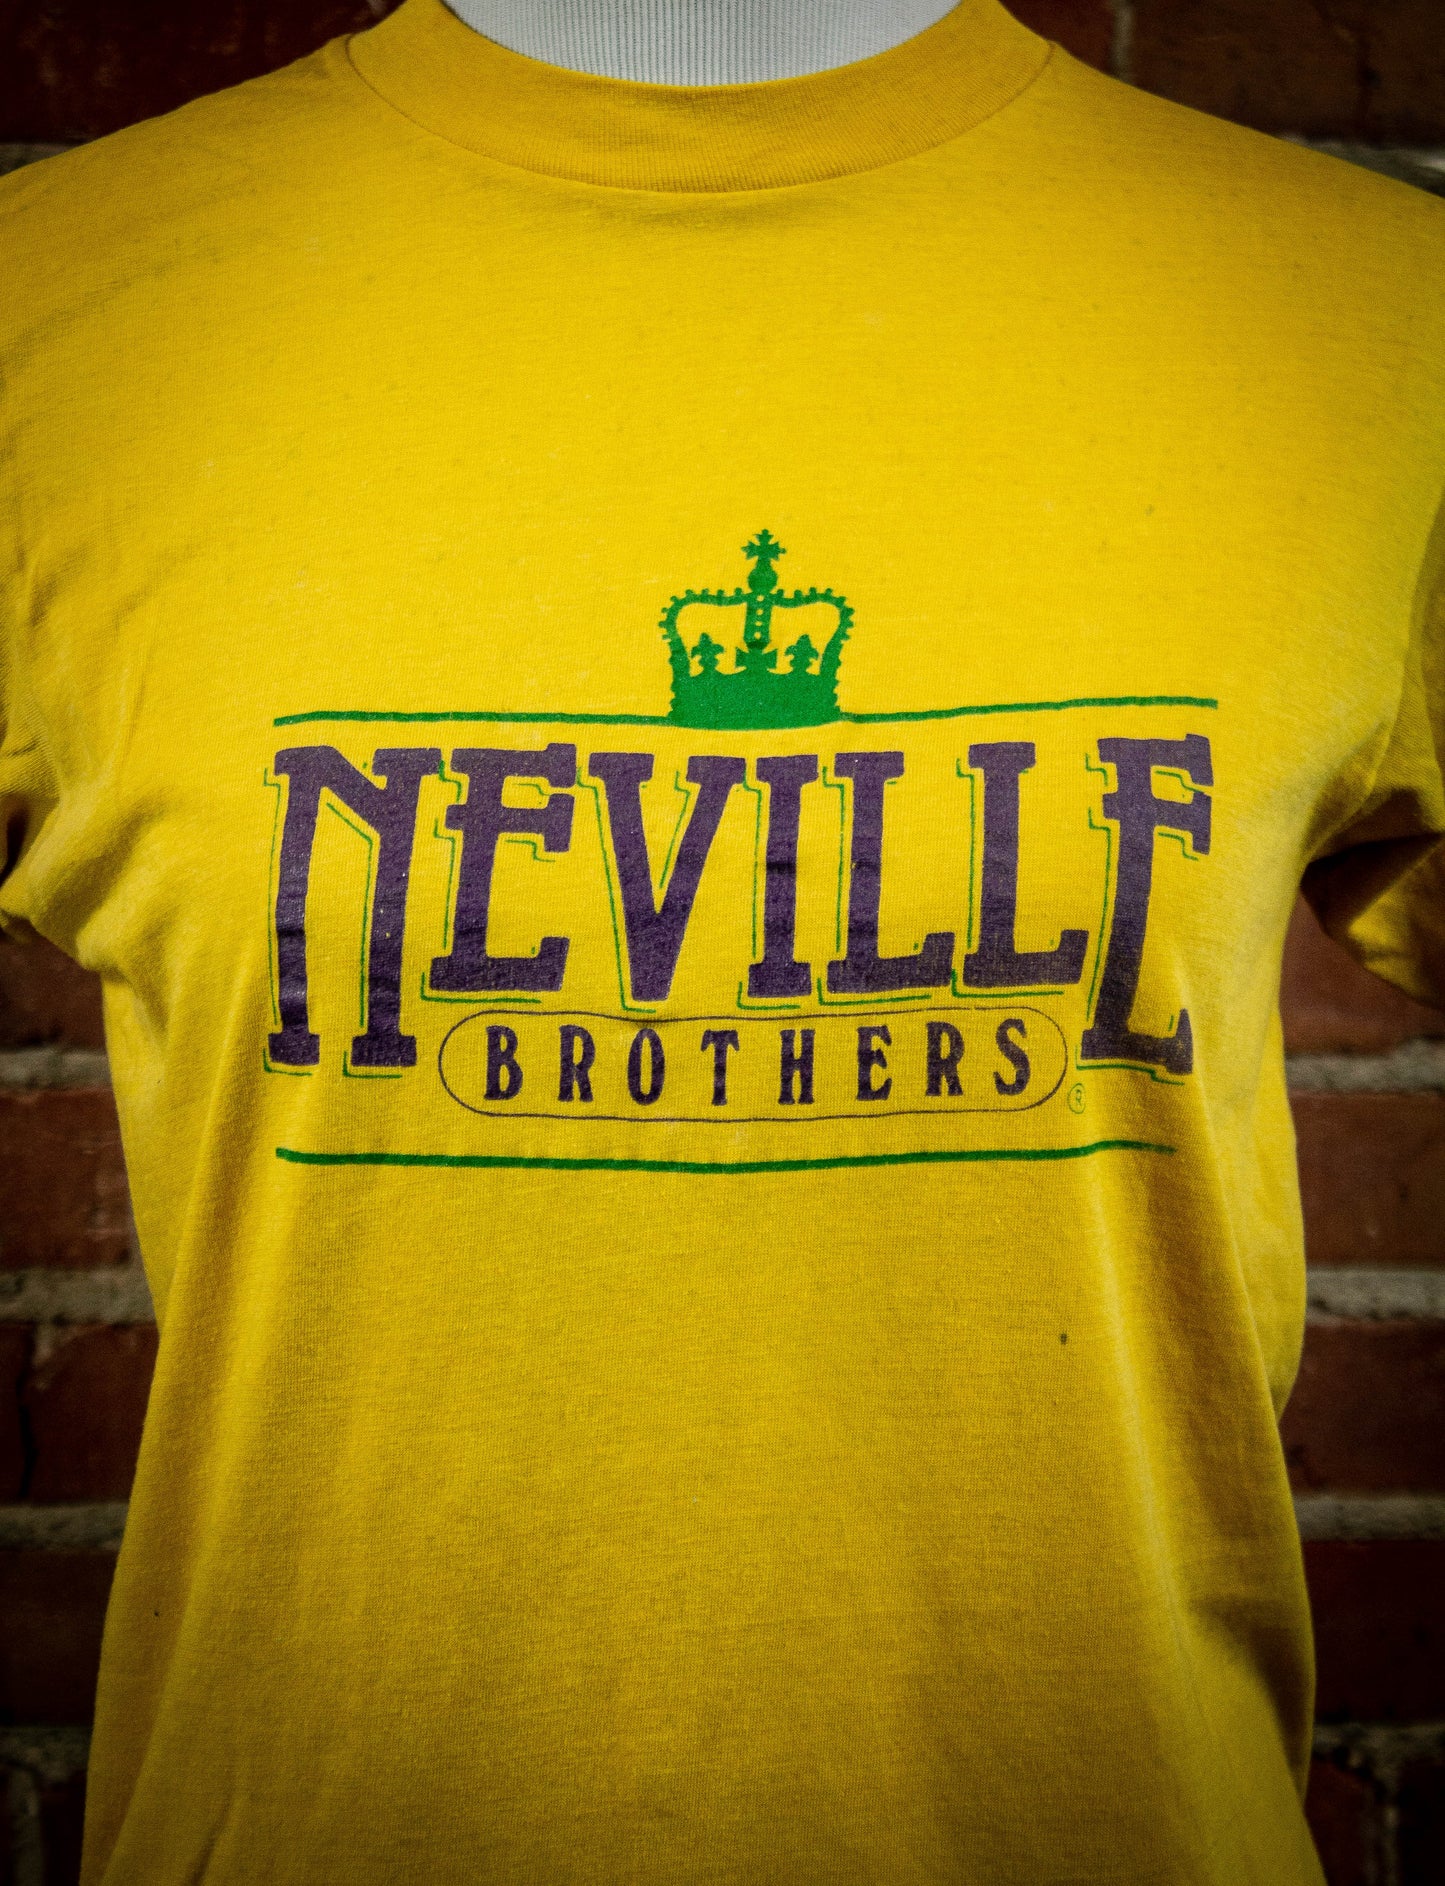 Vintage Early 80's Neville Bro's Yellow Concert T Shirt Unisex Small